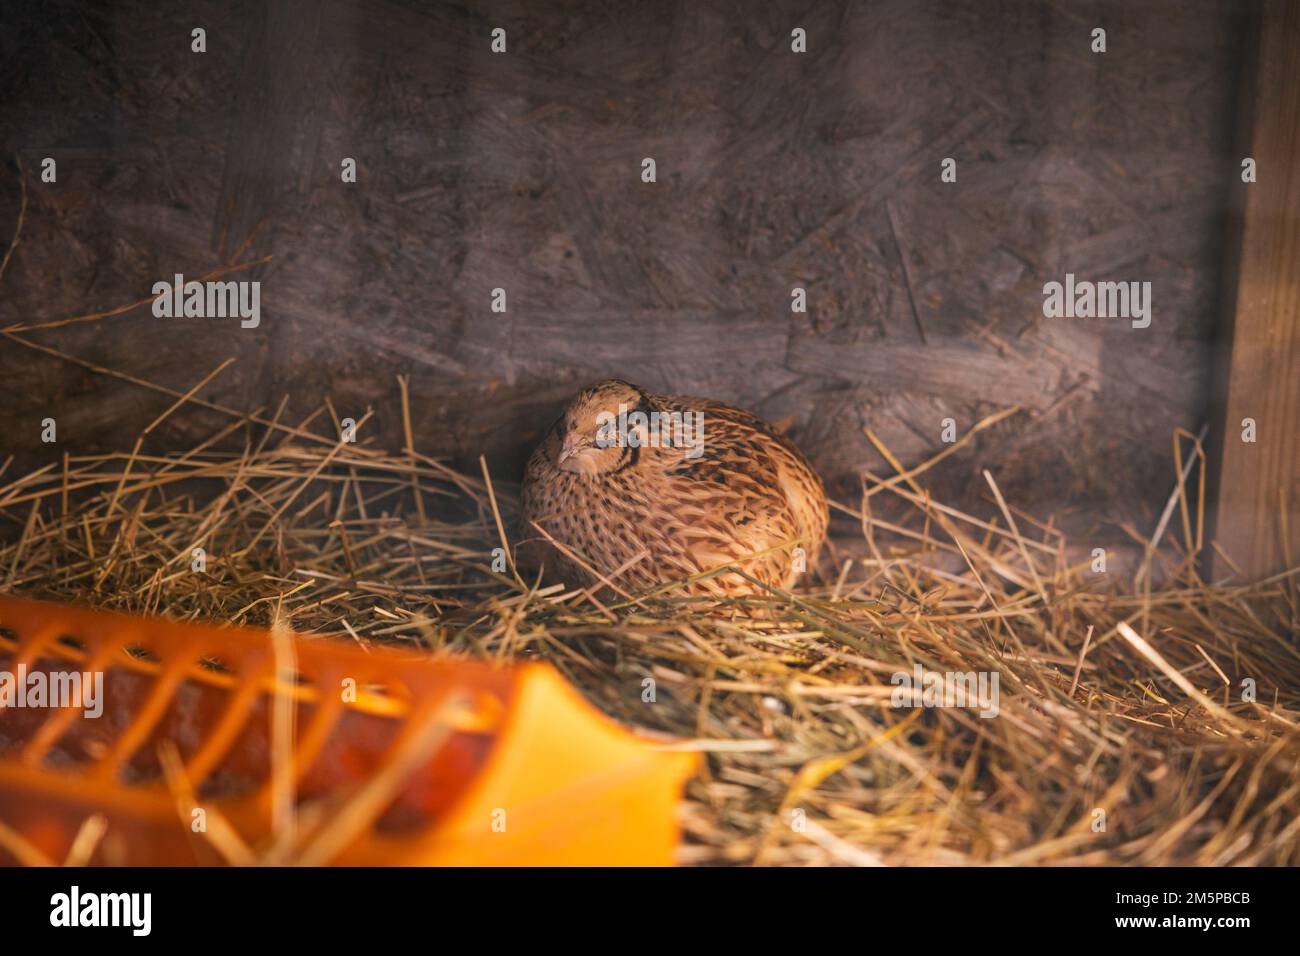 Quails in pen, cute animals used for eggs at farm. Stock Photo